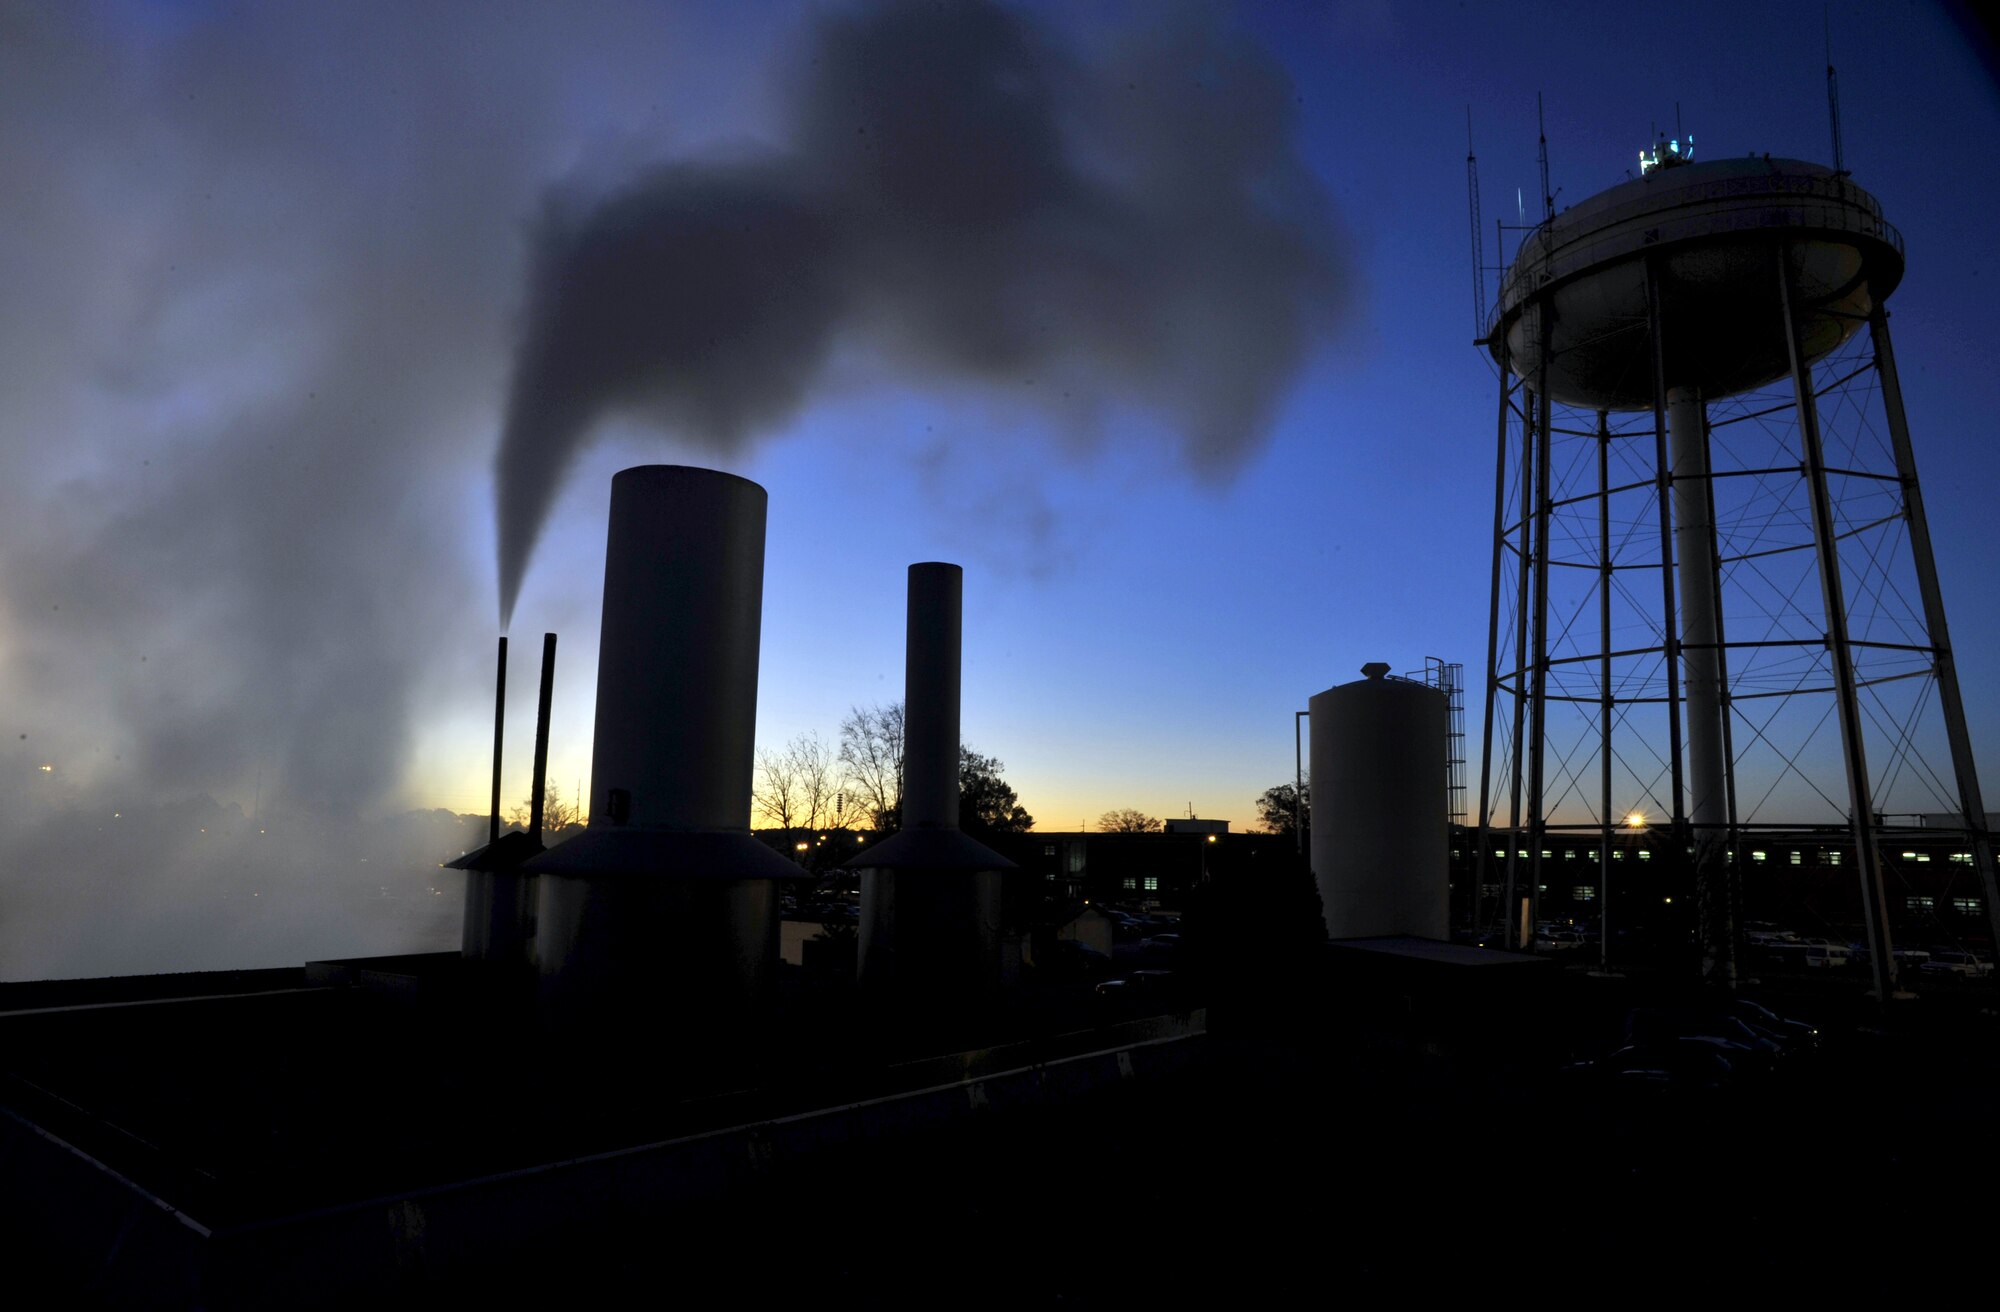 Steam rises from the roof of the steam plant (Building 177) at day break over Warner Robins Air Logistics Center Dec. 8.  U. S. Air Force photo by Claude Lazzara